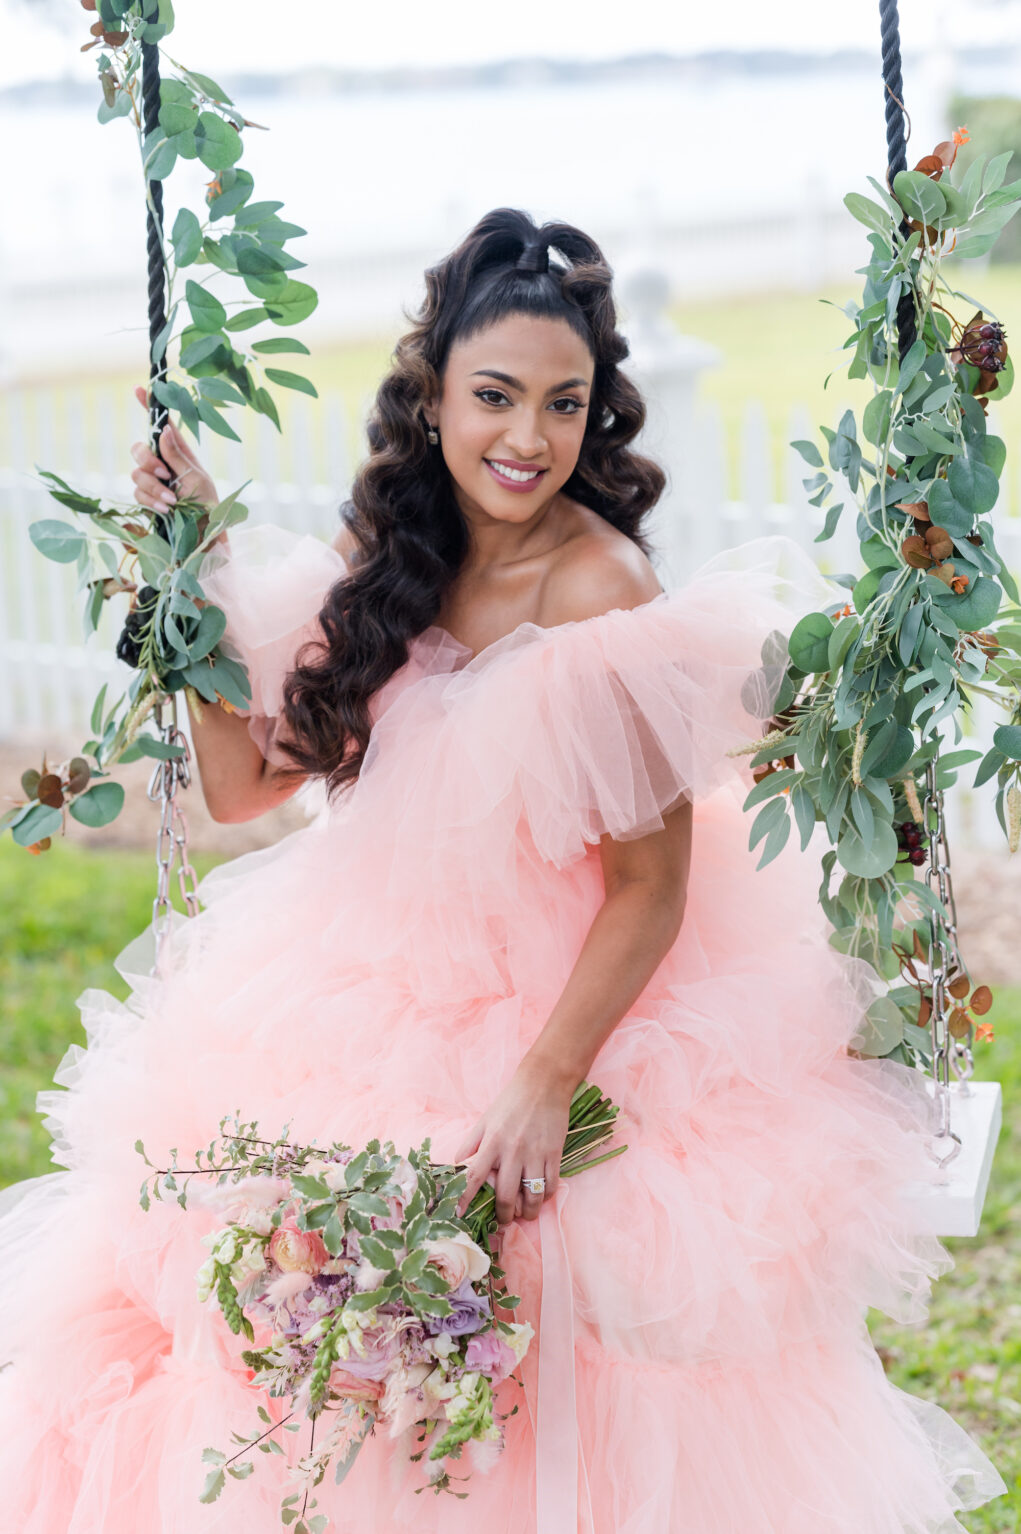 Off-the-shoulder Pink Layered Tulle Wedding Dress Inspiration | Swing Flower Arrangement | Pink and Orange Garden Roses with Greenery Bouquet Ideas | Tampa Bay Florist Save The Date Florida | Photographer Amanda Zabrocki Photography